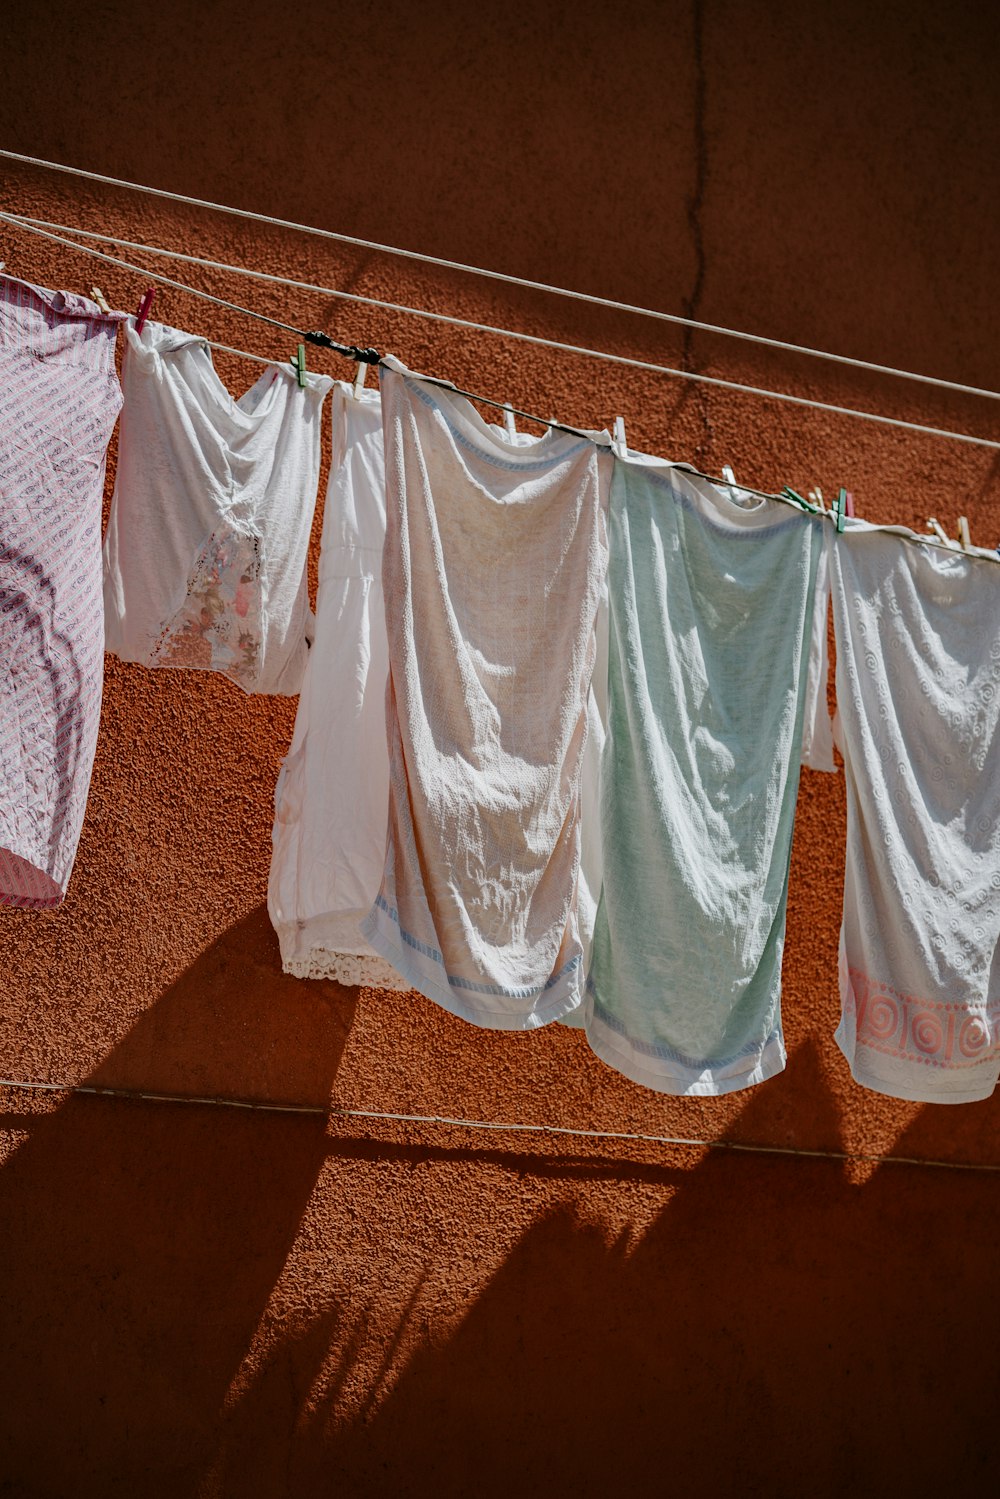 assorted-color clothes hanged on clothesline